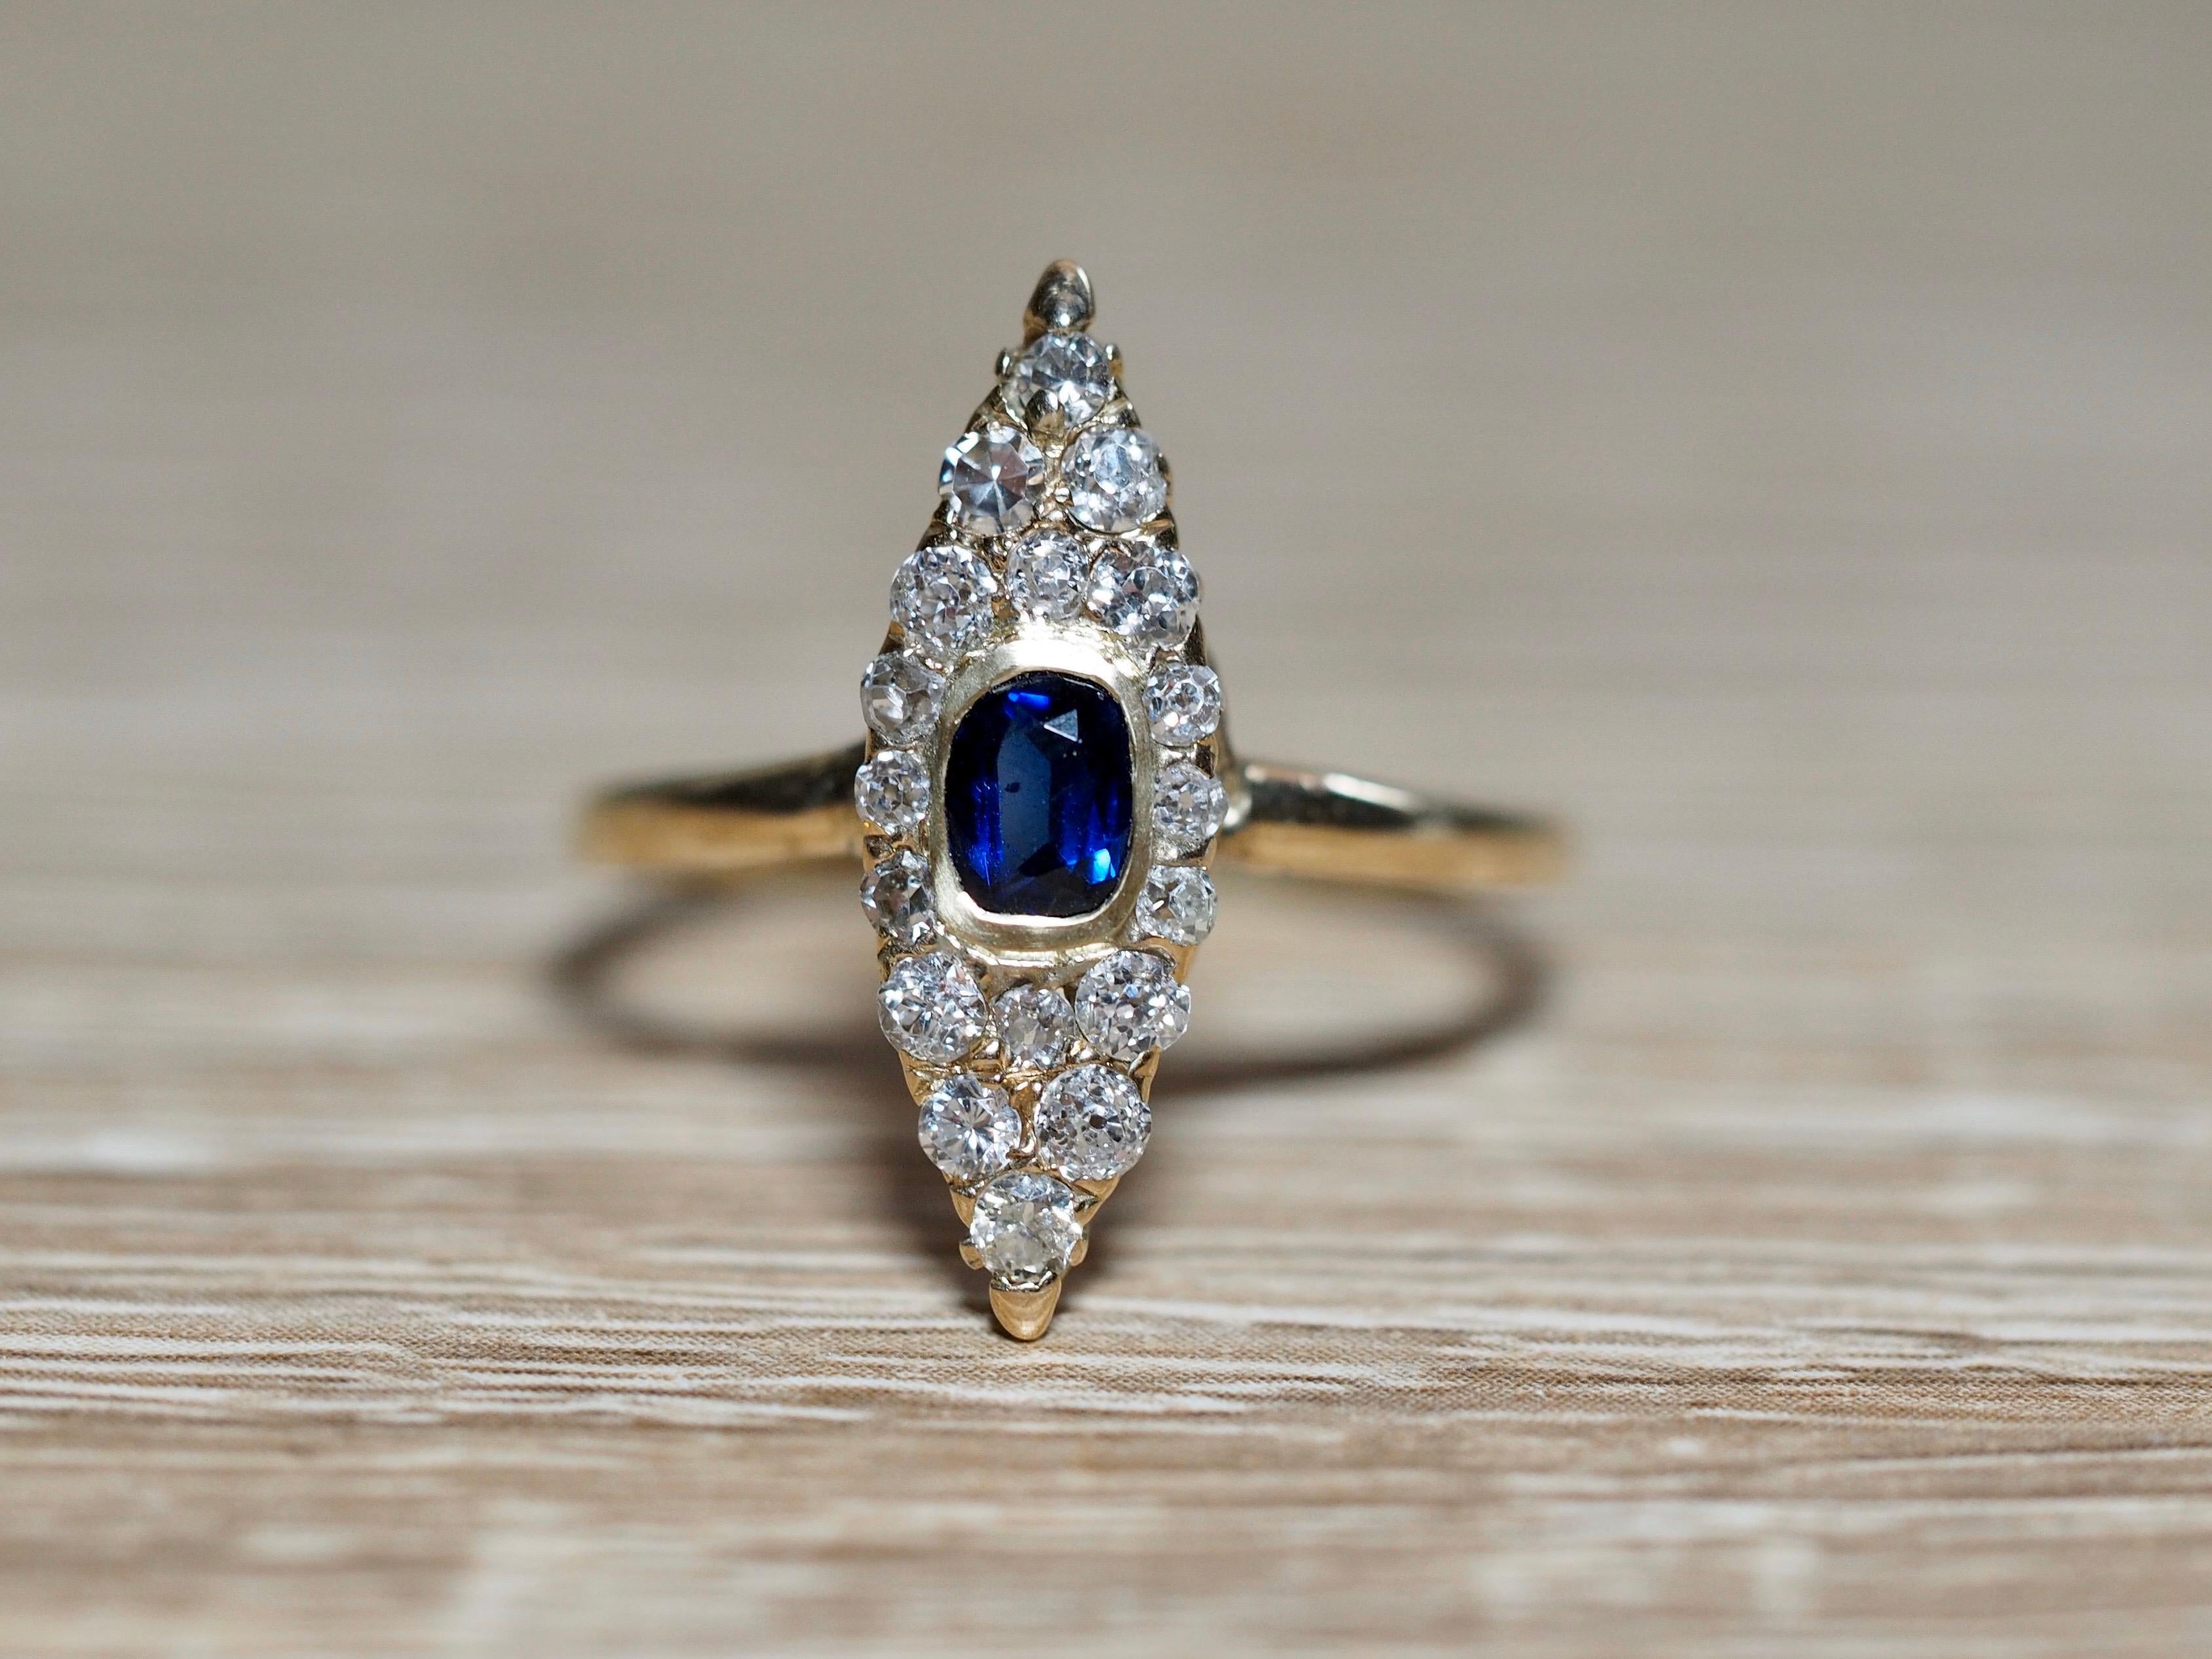 This Victorian Navette ring dates back to the early 1900's. The center is a deep royal 0.35 carat blue sapphire center illuminating in color. It is bezel set in a yellow gold frame sitting flush on the ring. The center is surrounded in the famous